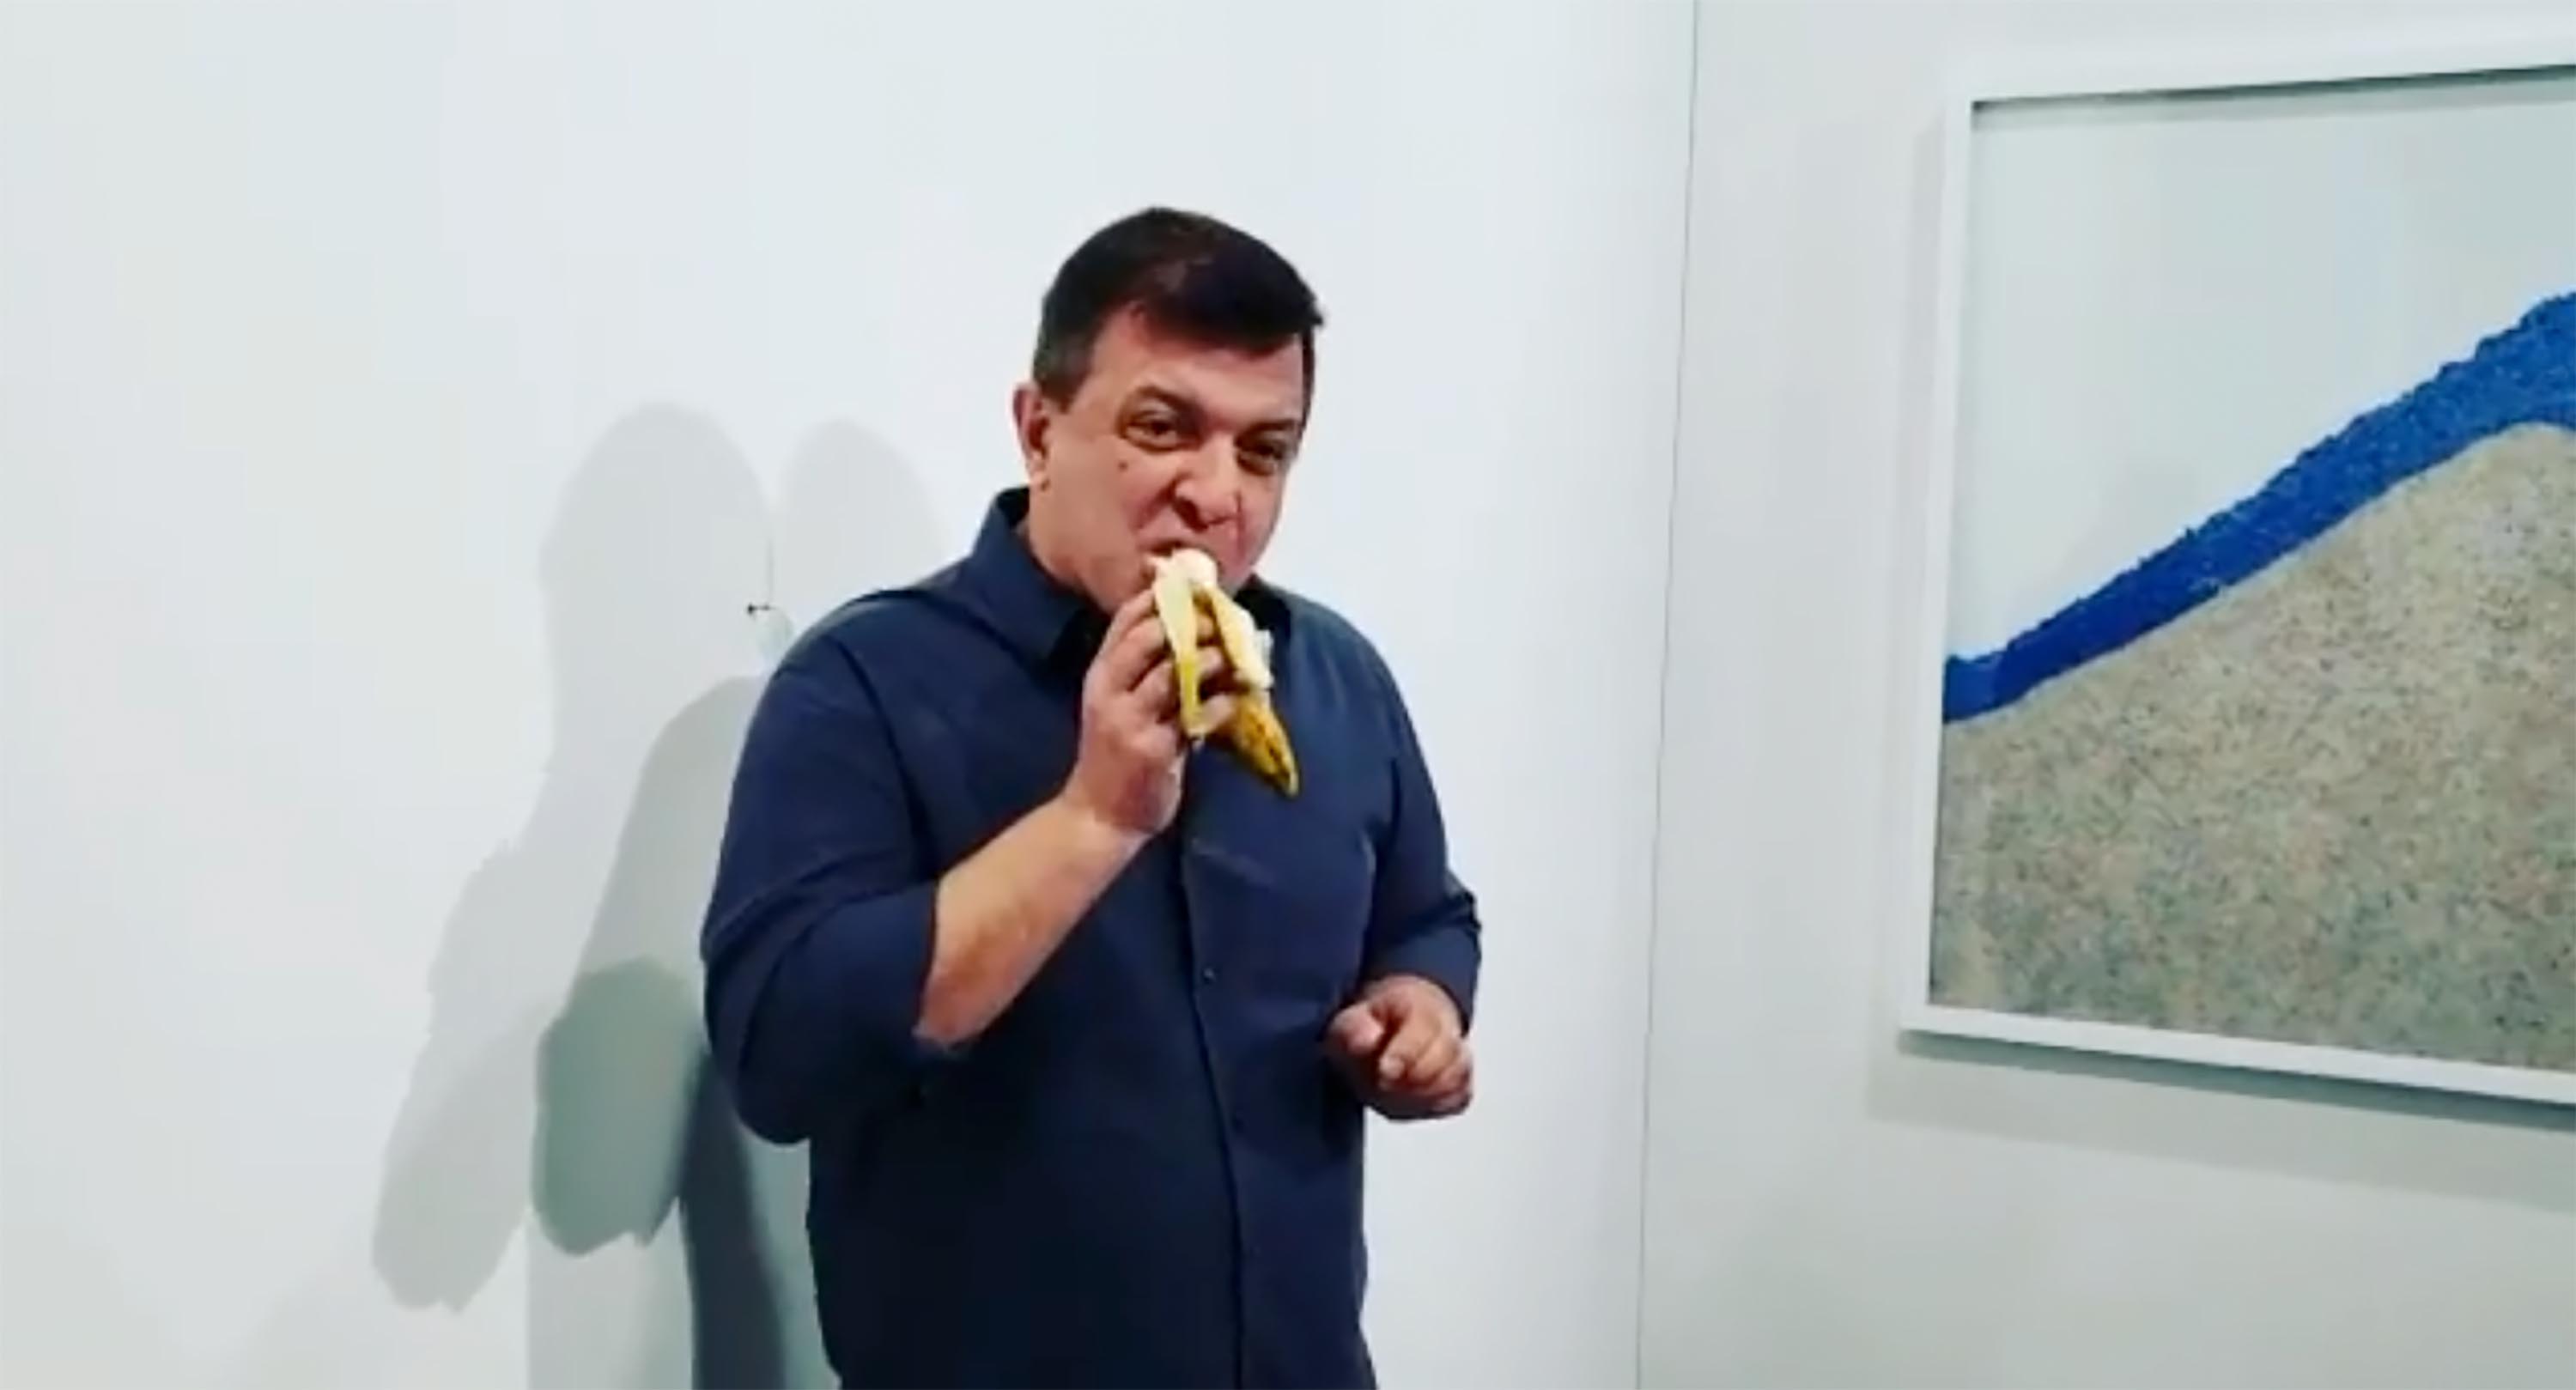 Man who ate the $120,000 banana art installation says he isn't sorry and  did it to create art - CNN Style